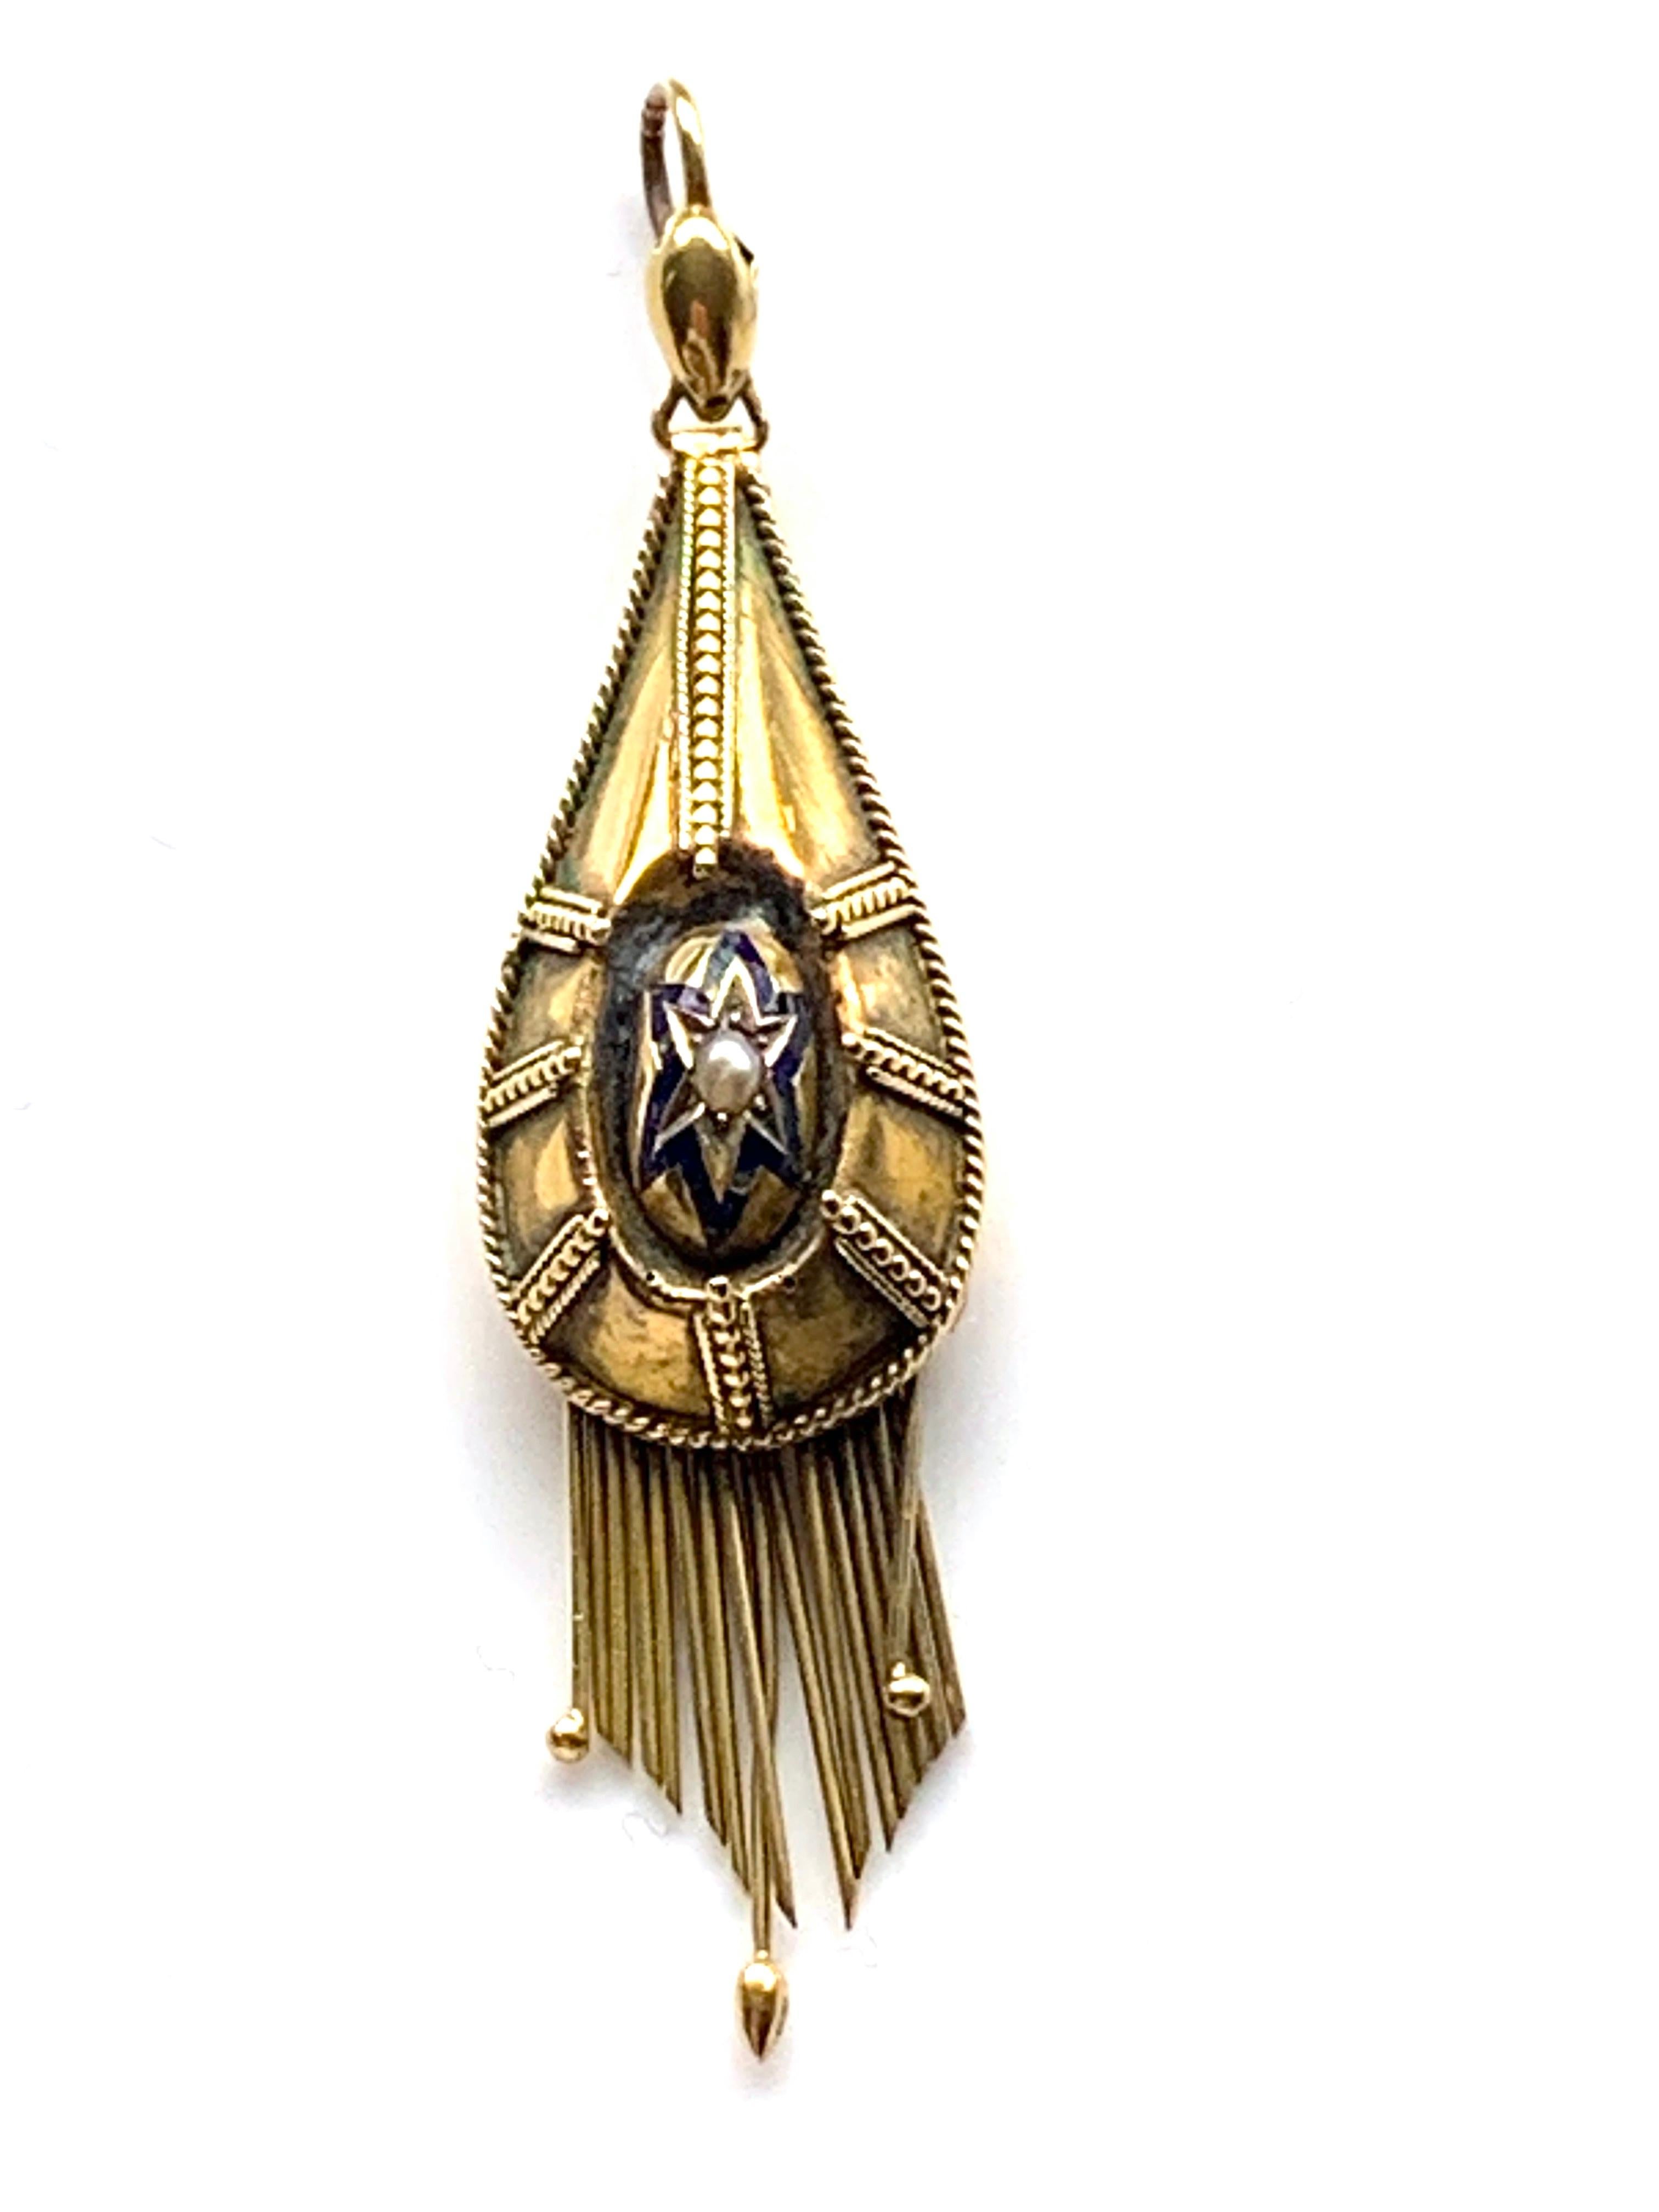 Antique 20ct Gold Pendant
Fringe mechanism
Genuine Pearl surrounded by a navy blue enamel star
Circa 180os
Weight 4.26 grammes
Height 2.25